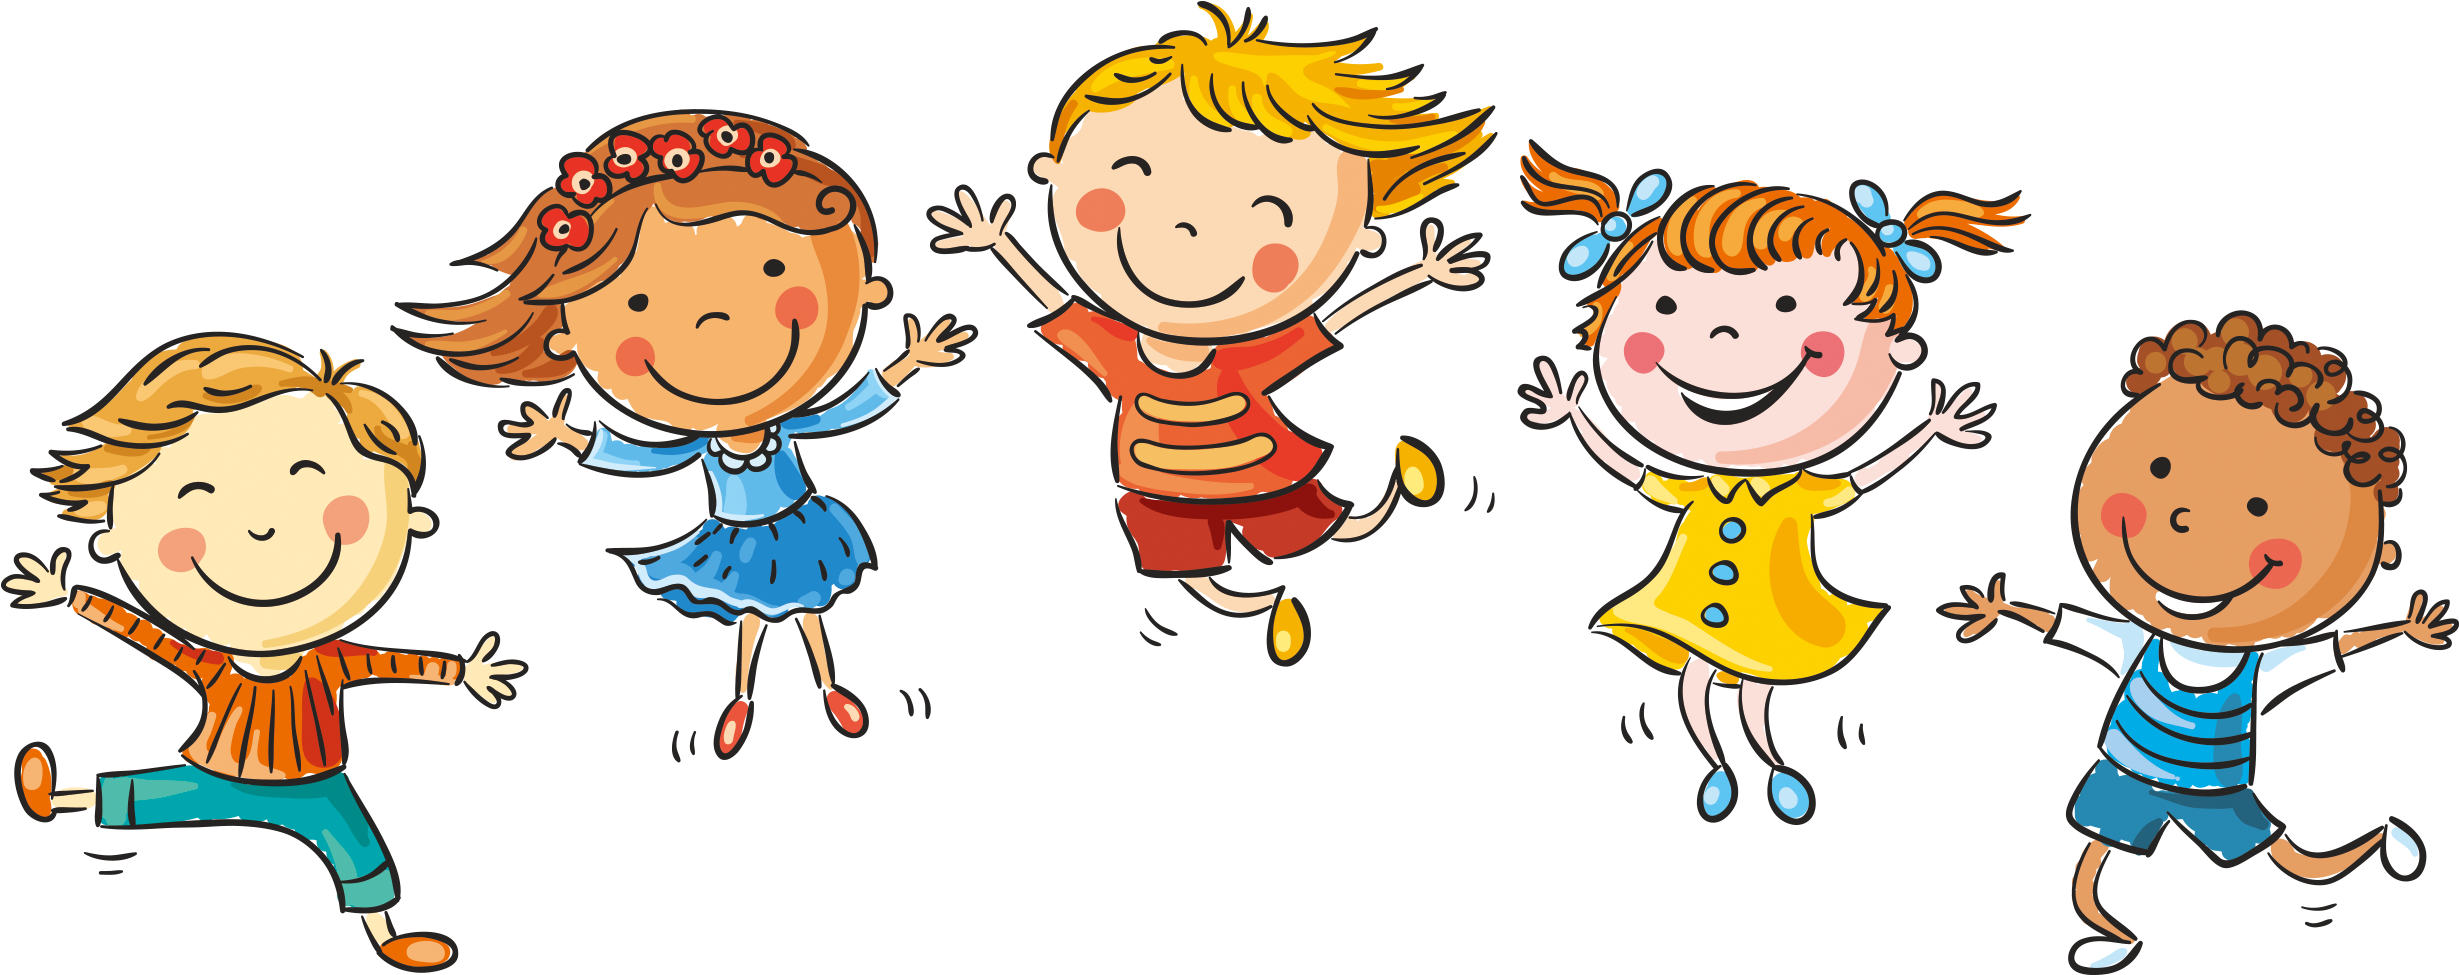 Child Animation Cartoon Png Clipart Animation Area Art Artwork | Images ...